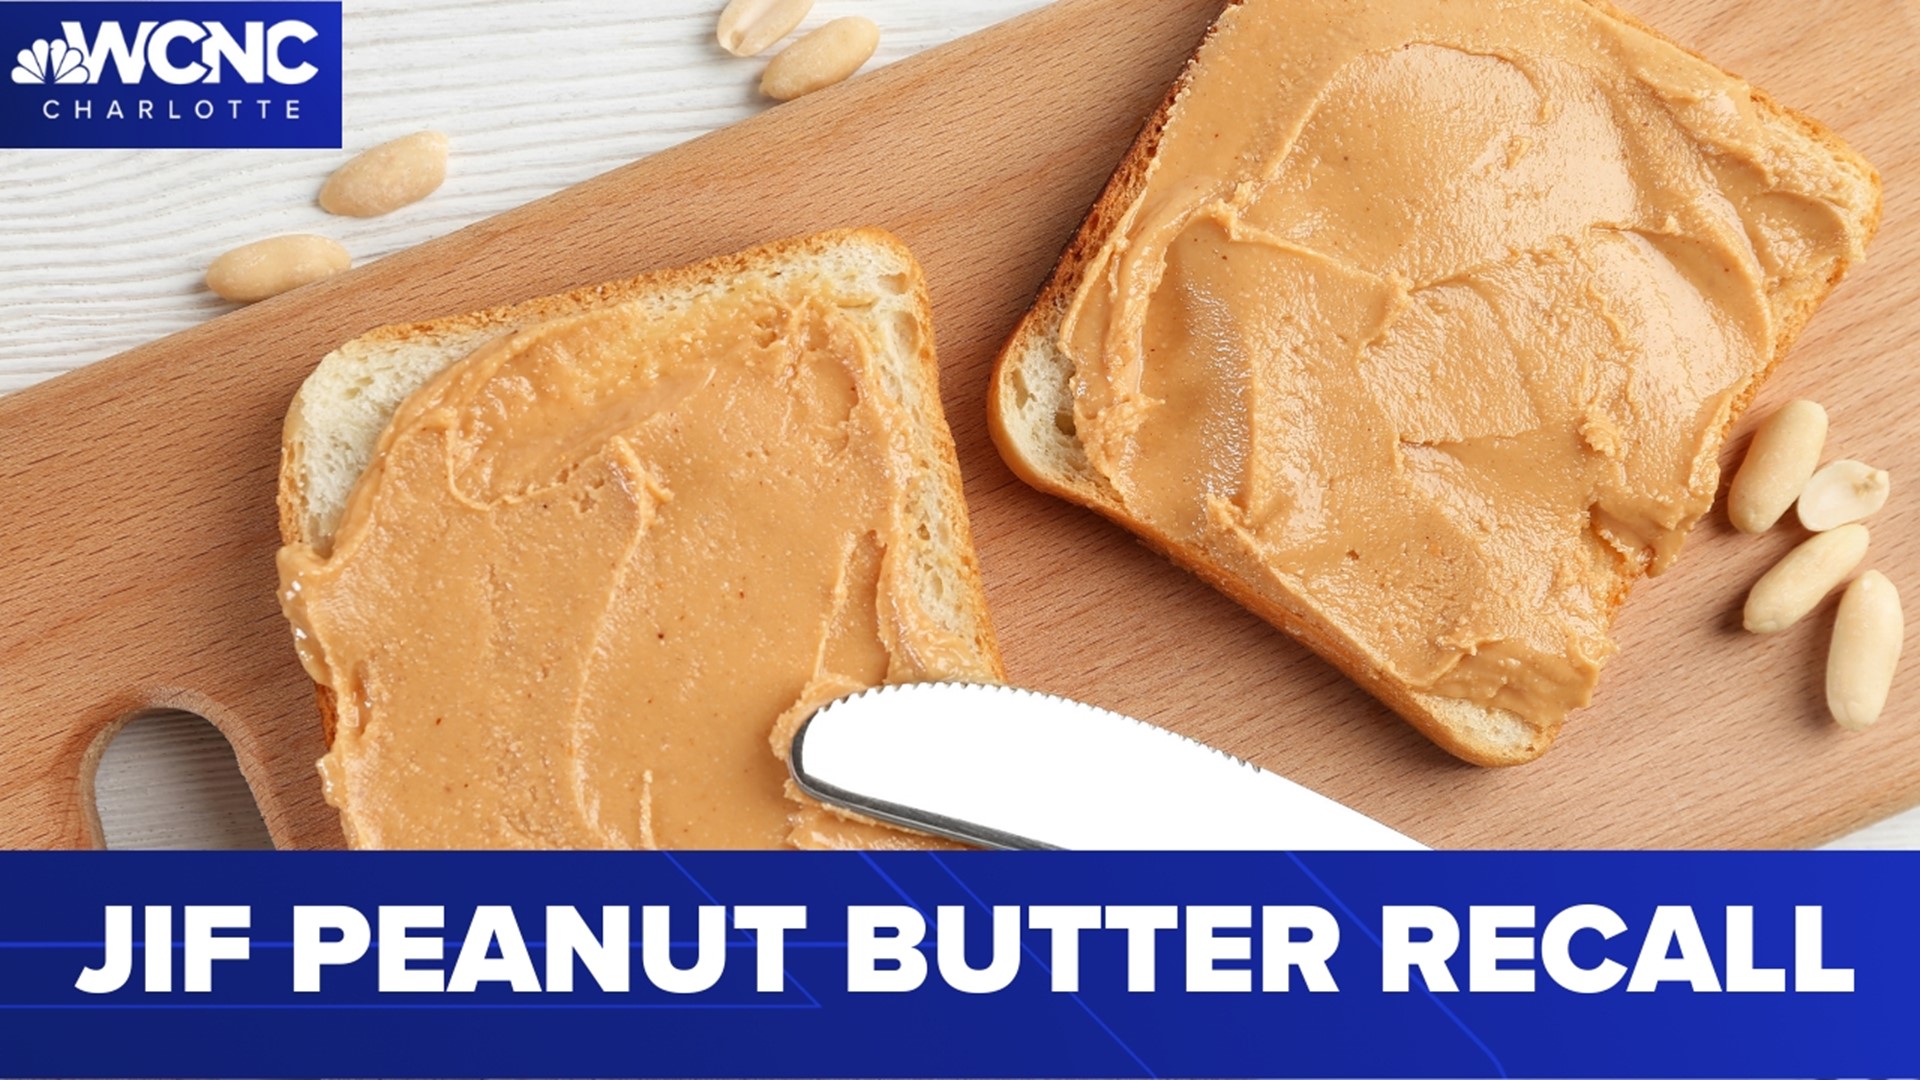 Over 40 varieties of Jif peanut butter are involved in the recall.